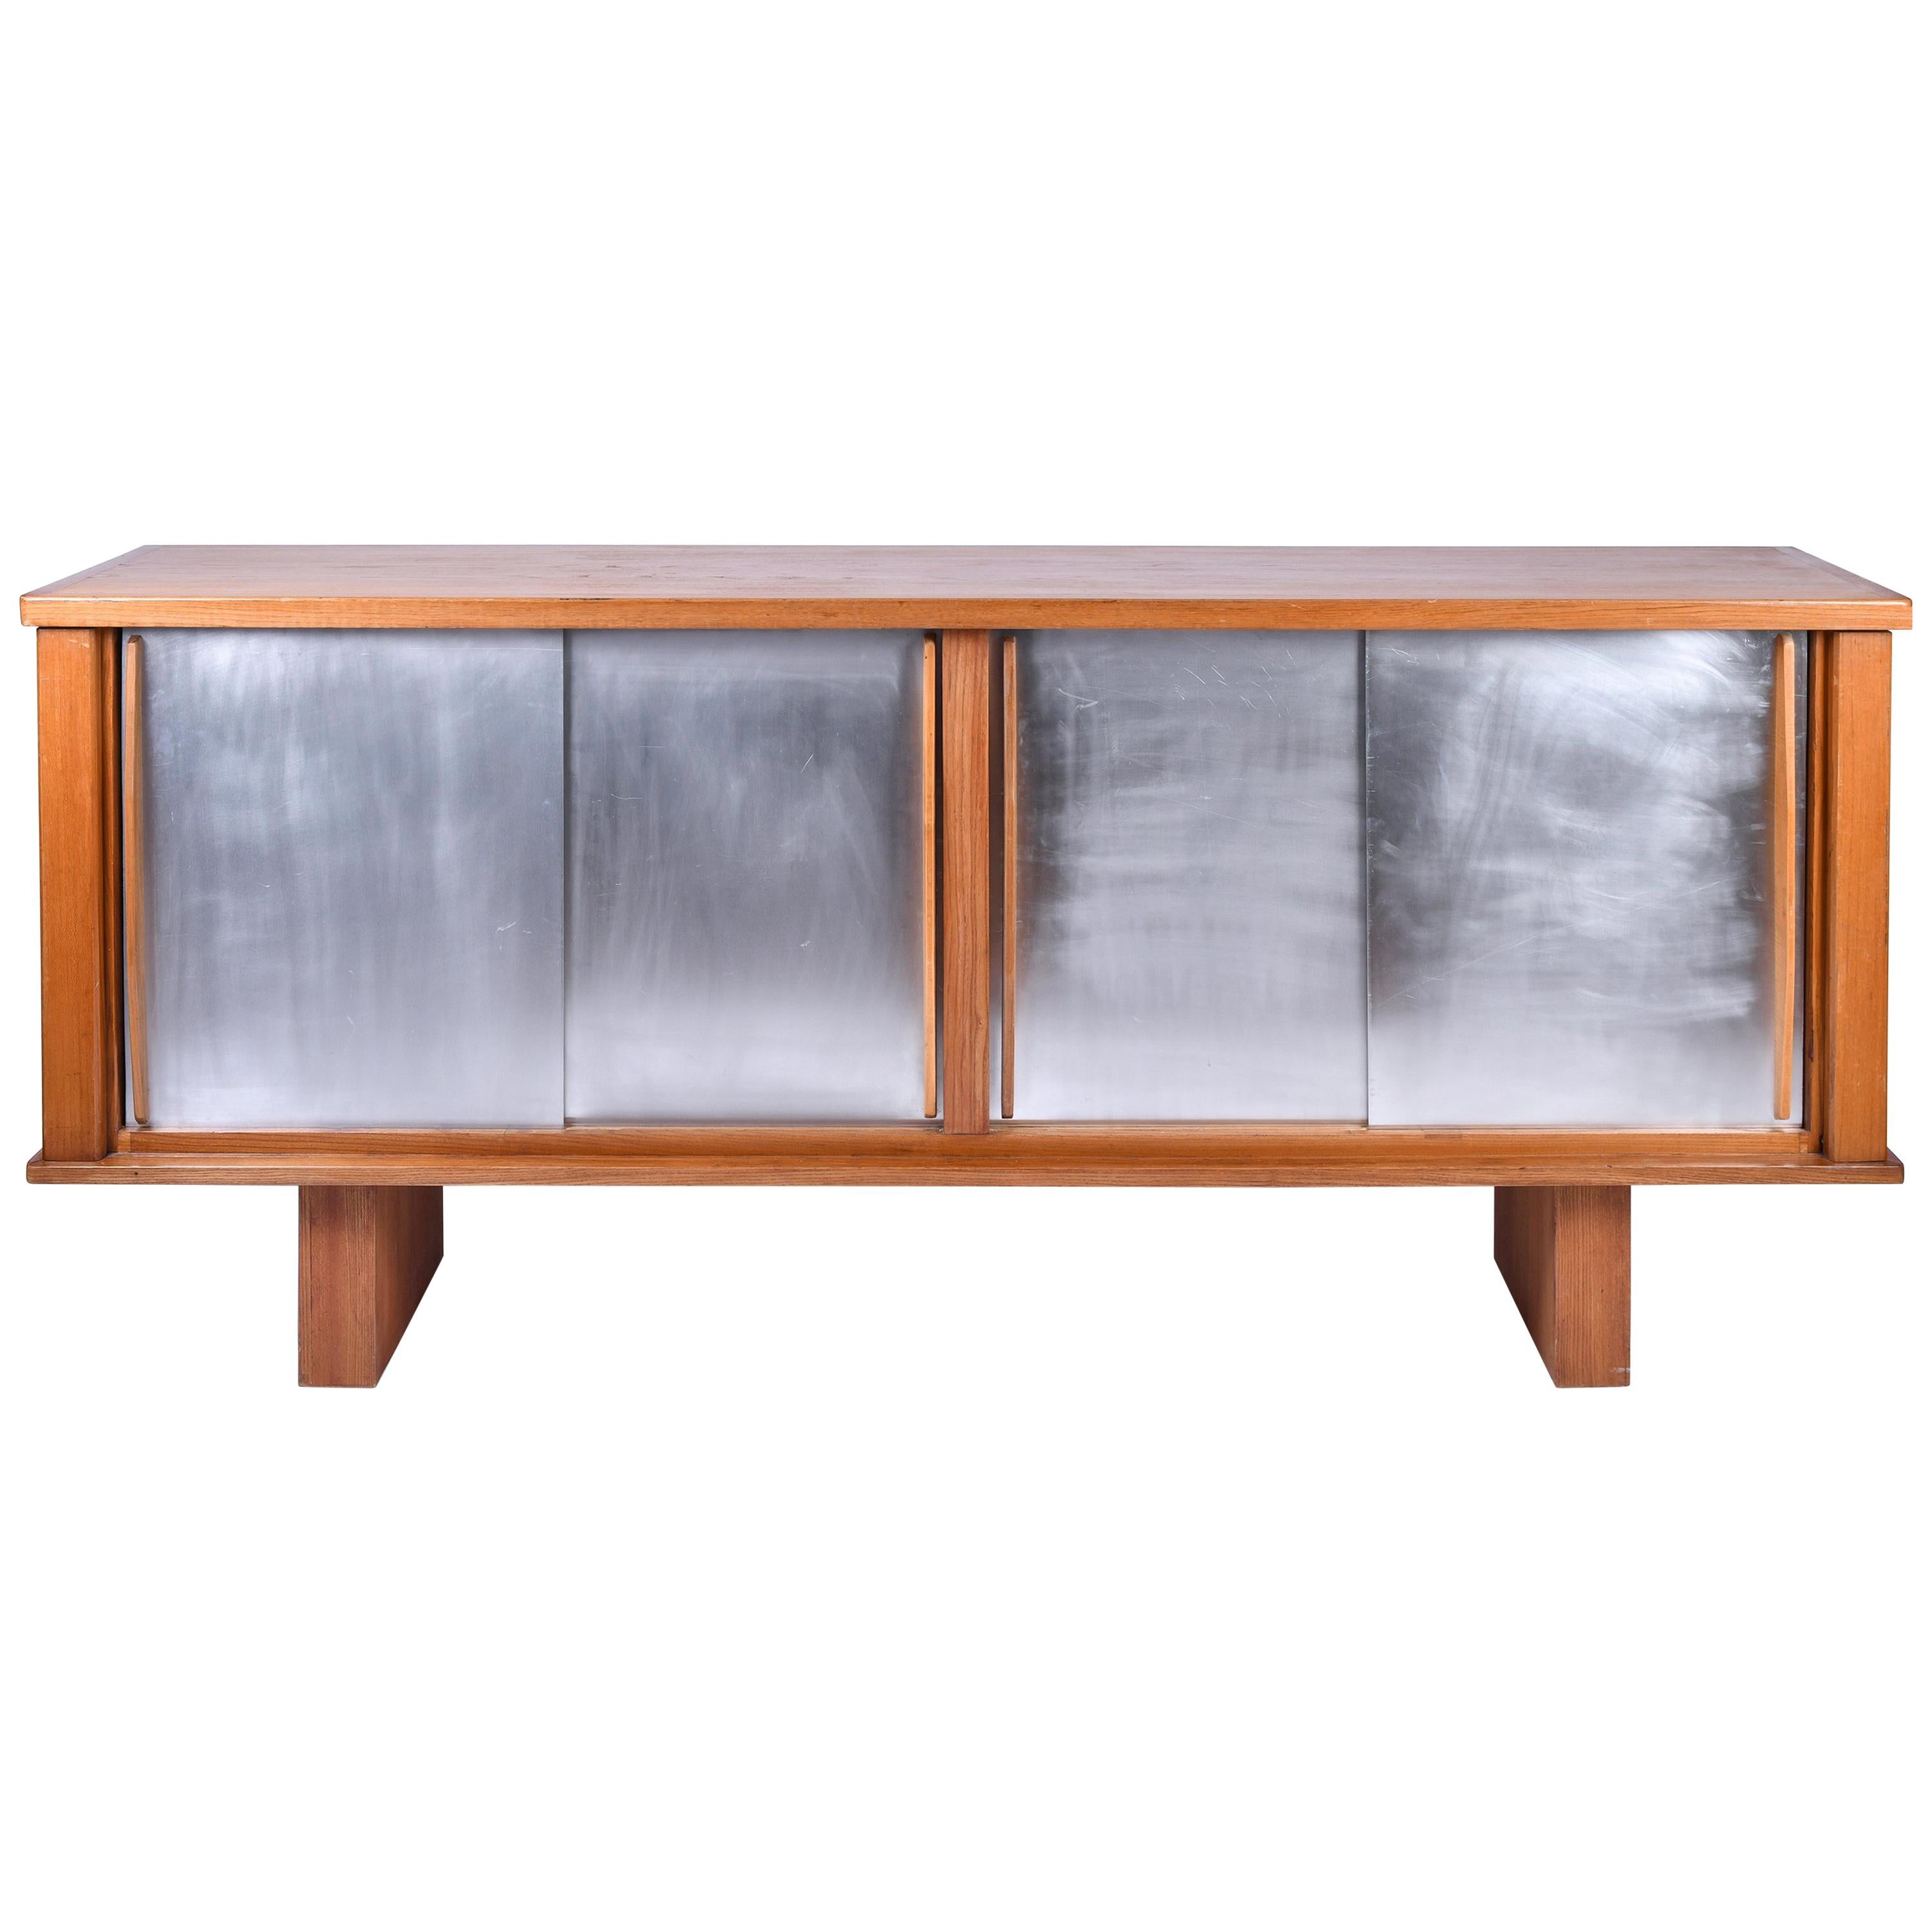 Large Sideboard in the Manner of Charlotte Perriand